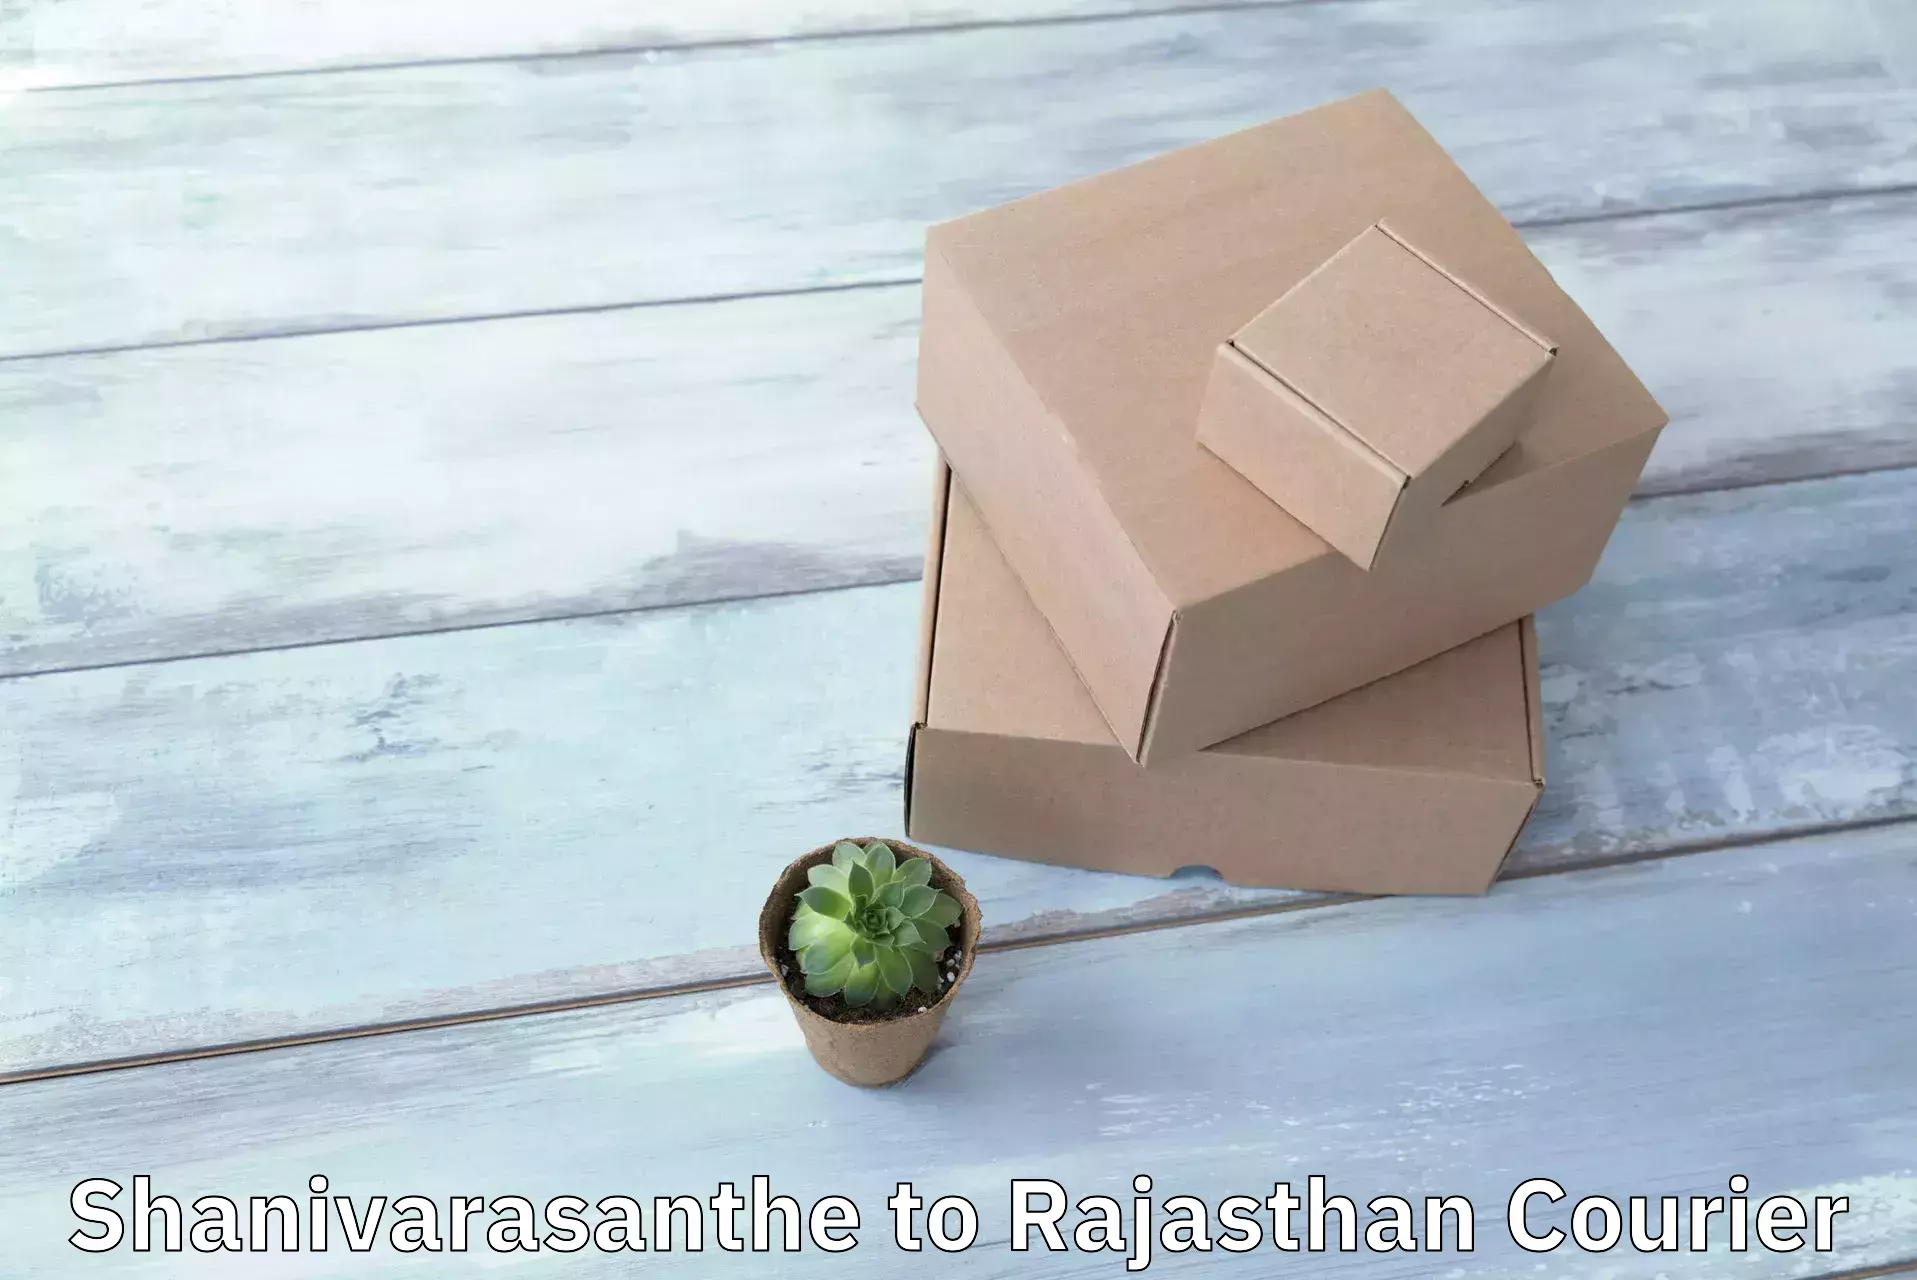 Sustainable courier practices Shanivarasanthe to Rajasthan